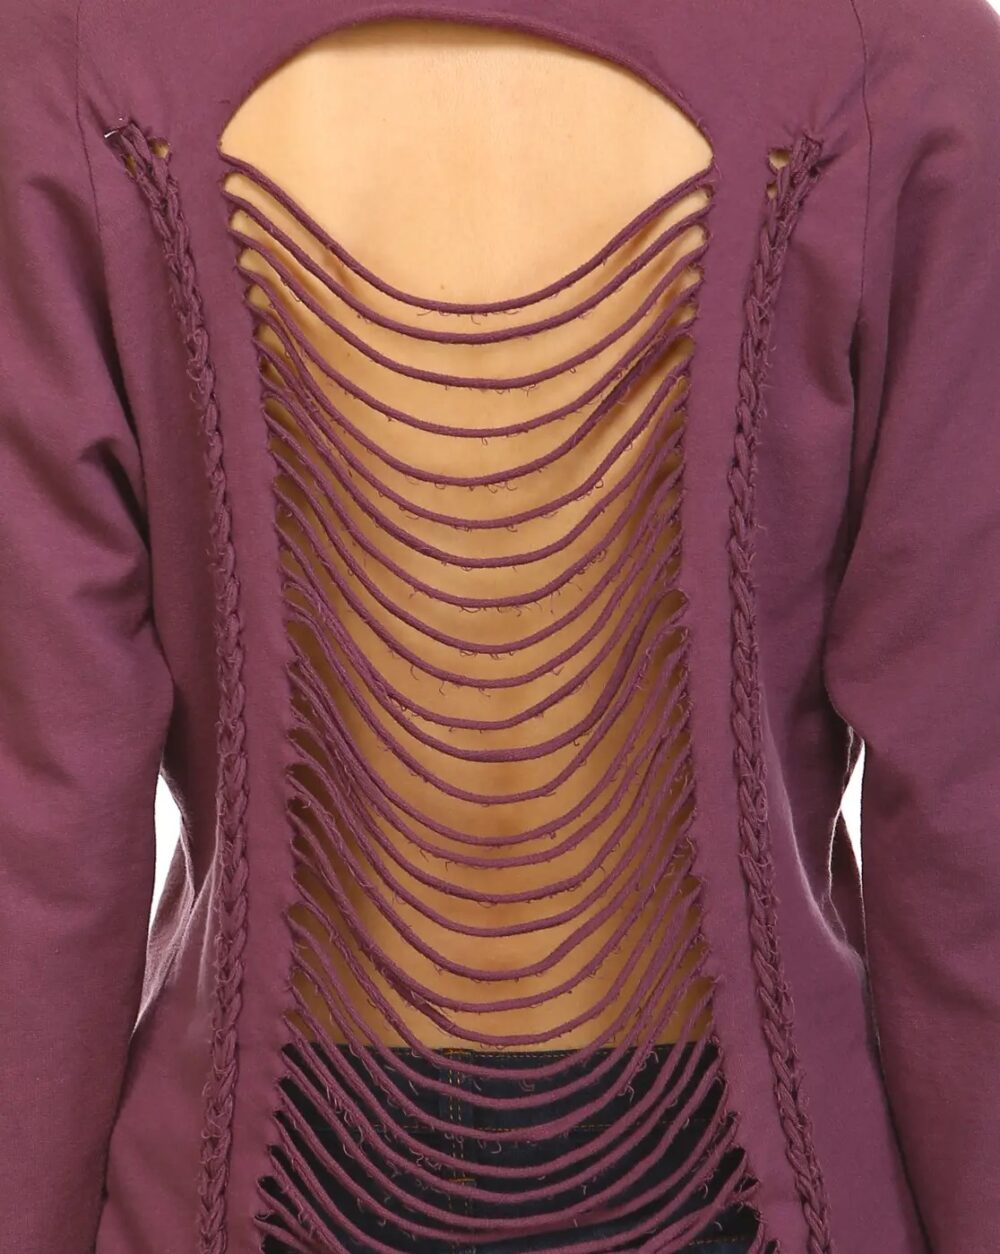 Loose Fit Top With Back Slashing Detail Eggplant Made in USA